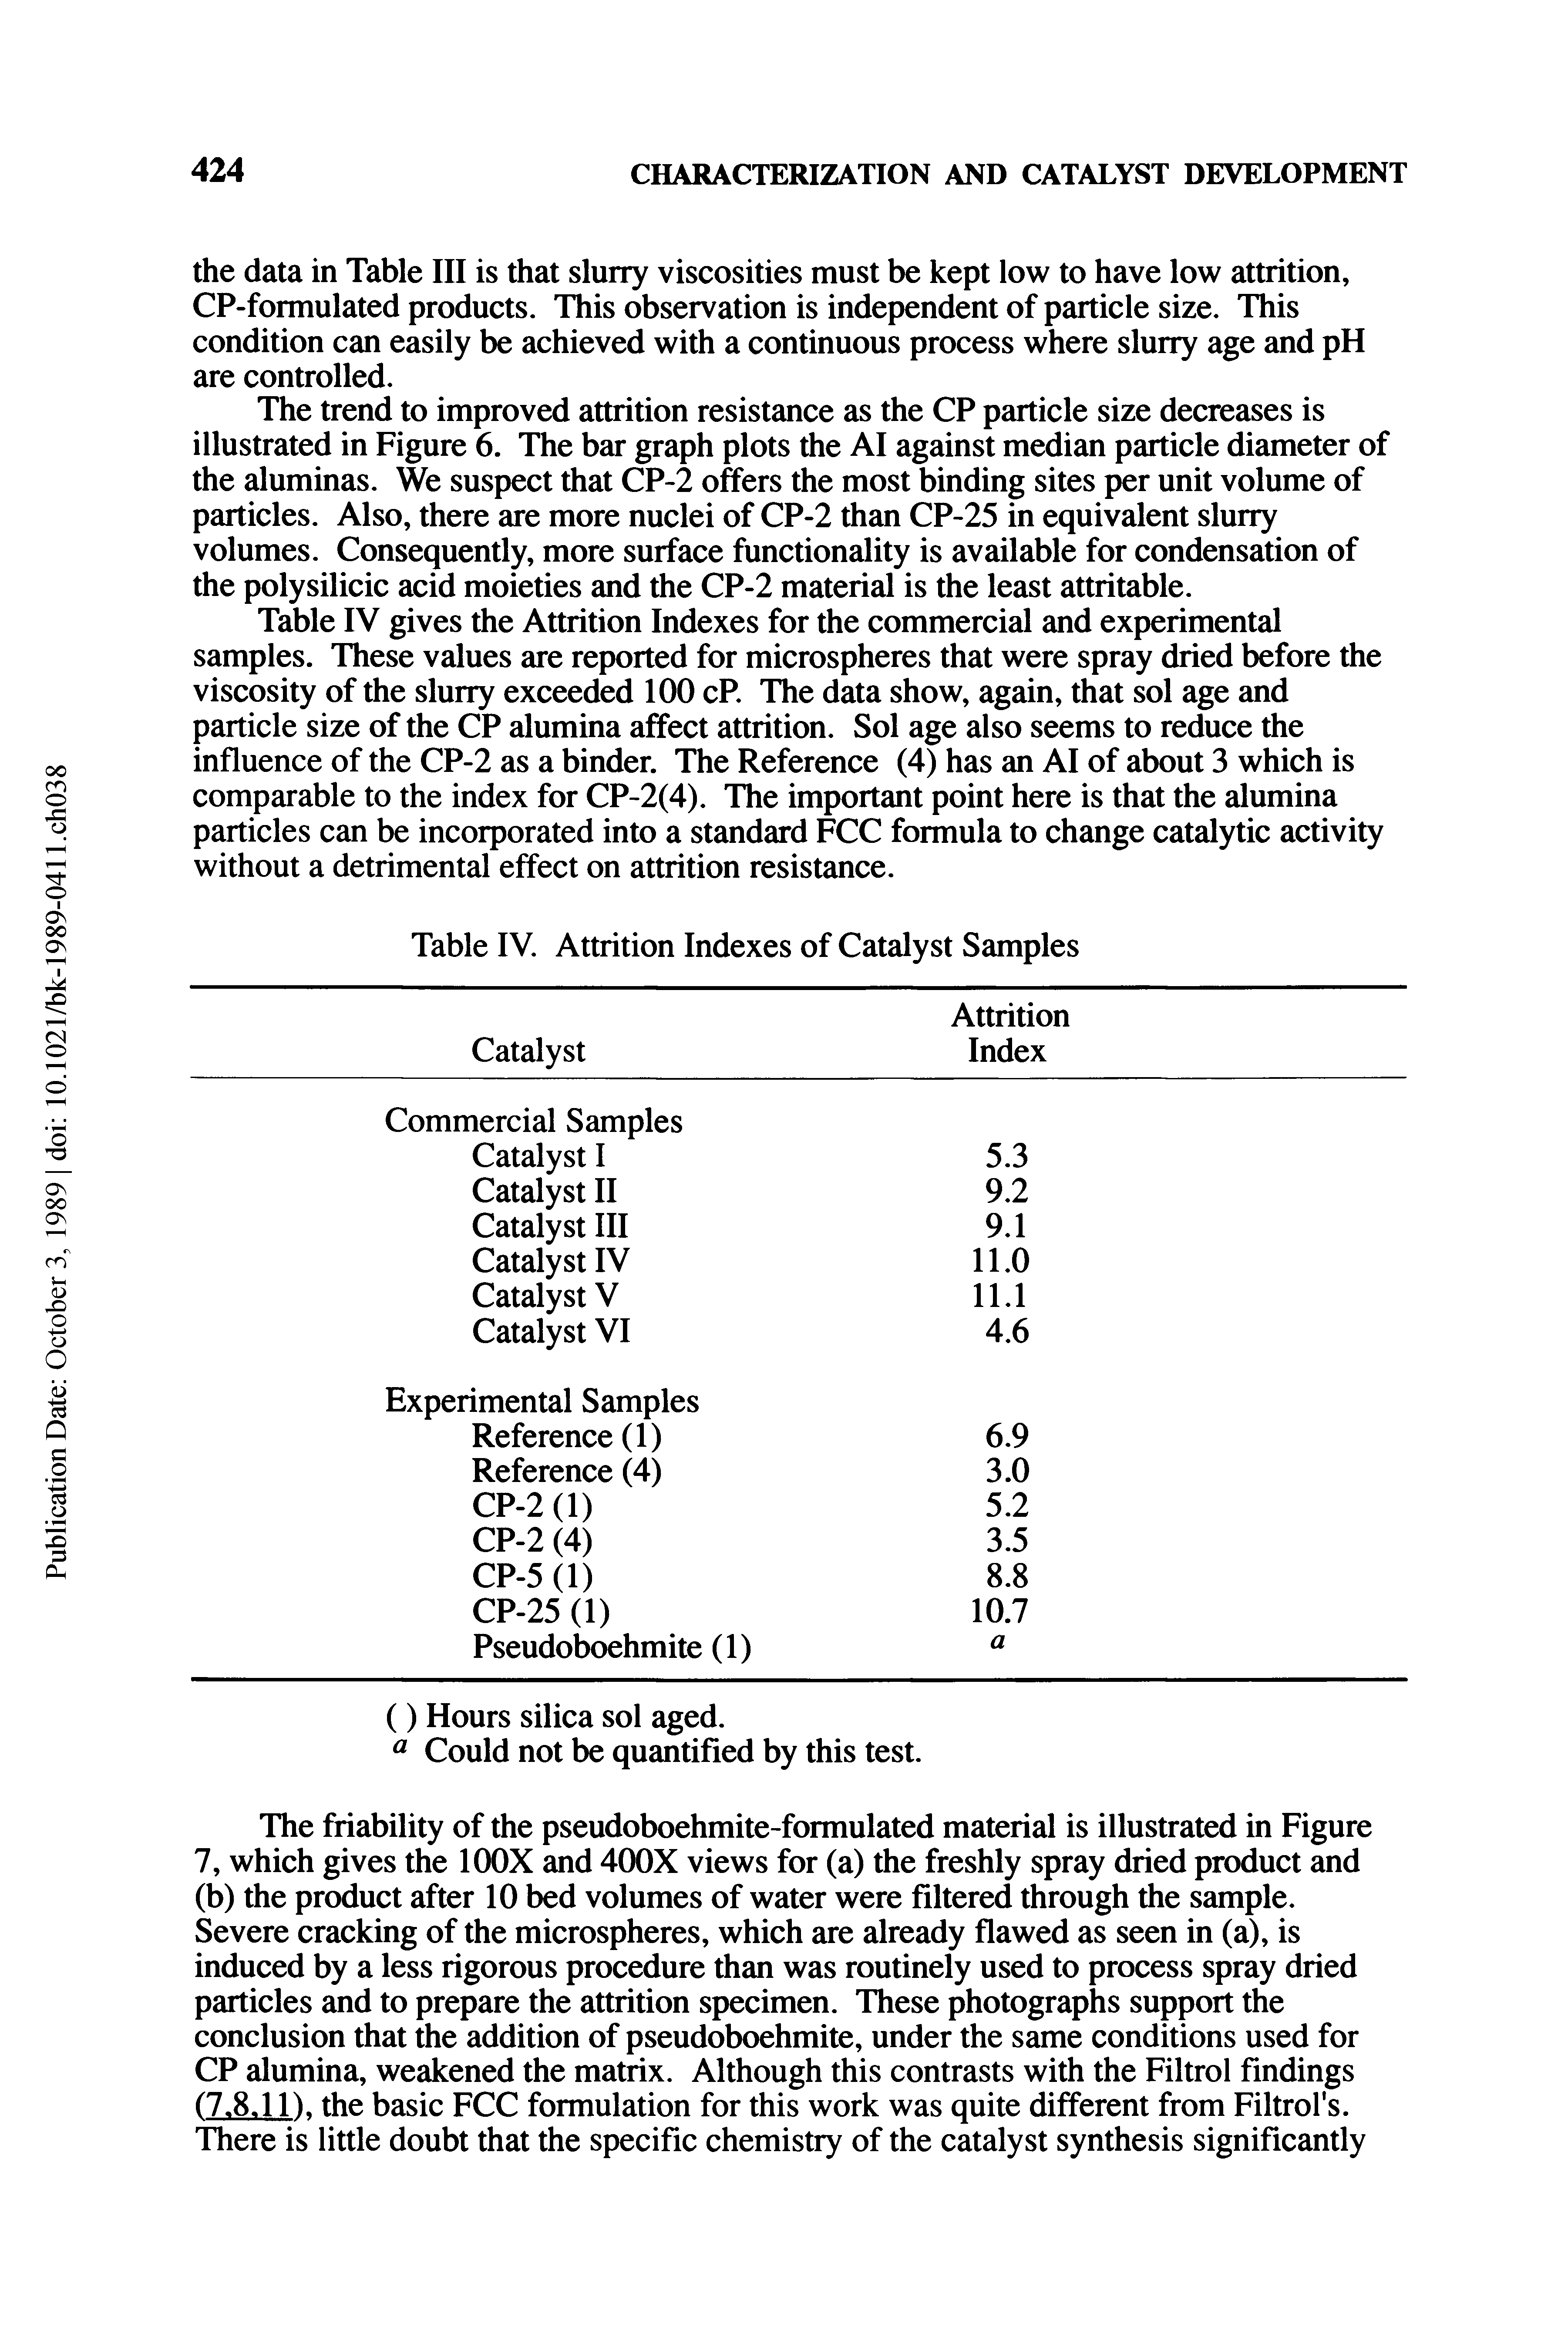 Table IV gives the Attrition Indexes for the commercial and experimental samples. These values are reported for microspheres that were spray dried before the viscosity of the slurry exceeded 100 cP. The data show, again, that sol age and particle size of the CP alumina affect attrition. Sol age also seems to reduce the influence of the CP-2 as a binder. The Reference (4) has an AI of about 3 which is comparable to the index for CP-2(4). The important point here is that the alumina particles can be incorporated into a standard FCC formula to change catalytic activity without a detrimental effect on attrition resistance.